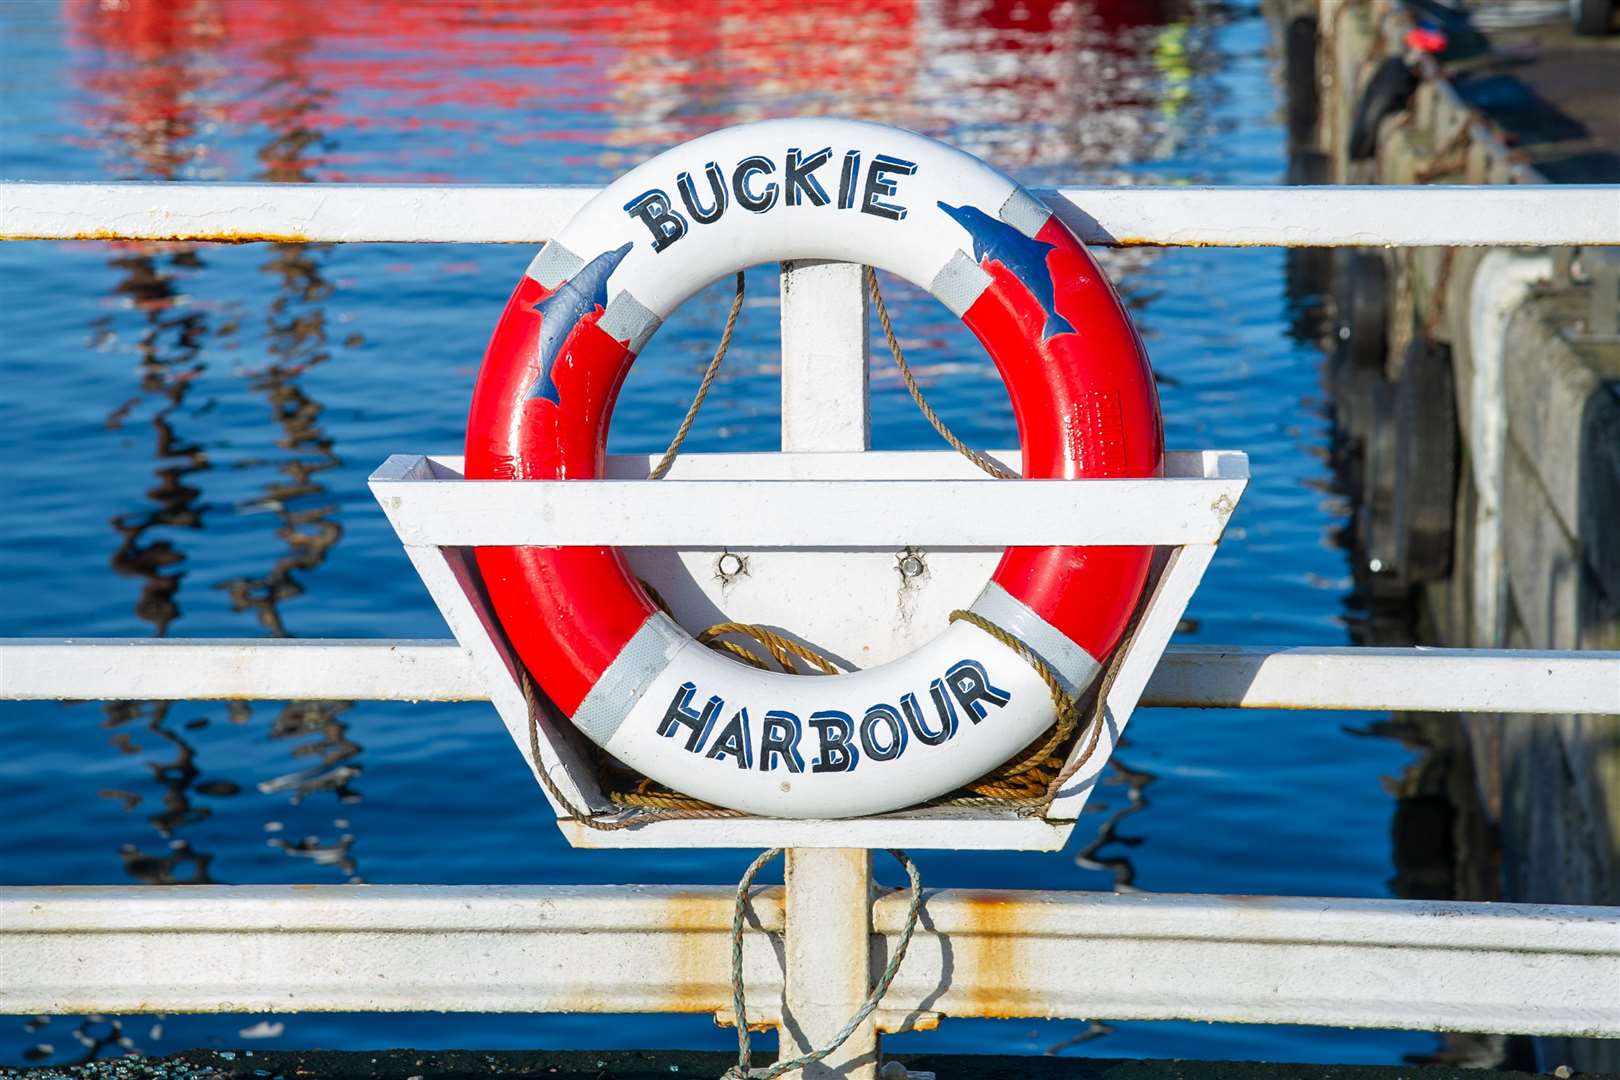 There was a busier week at Buckie Harbour. Picture: Daniel Forsyth